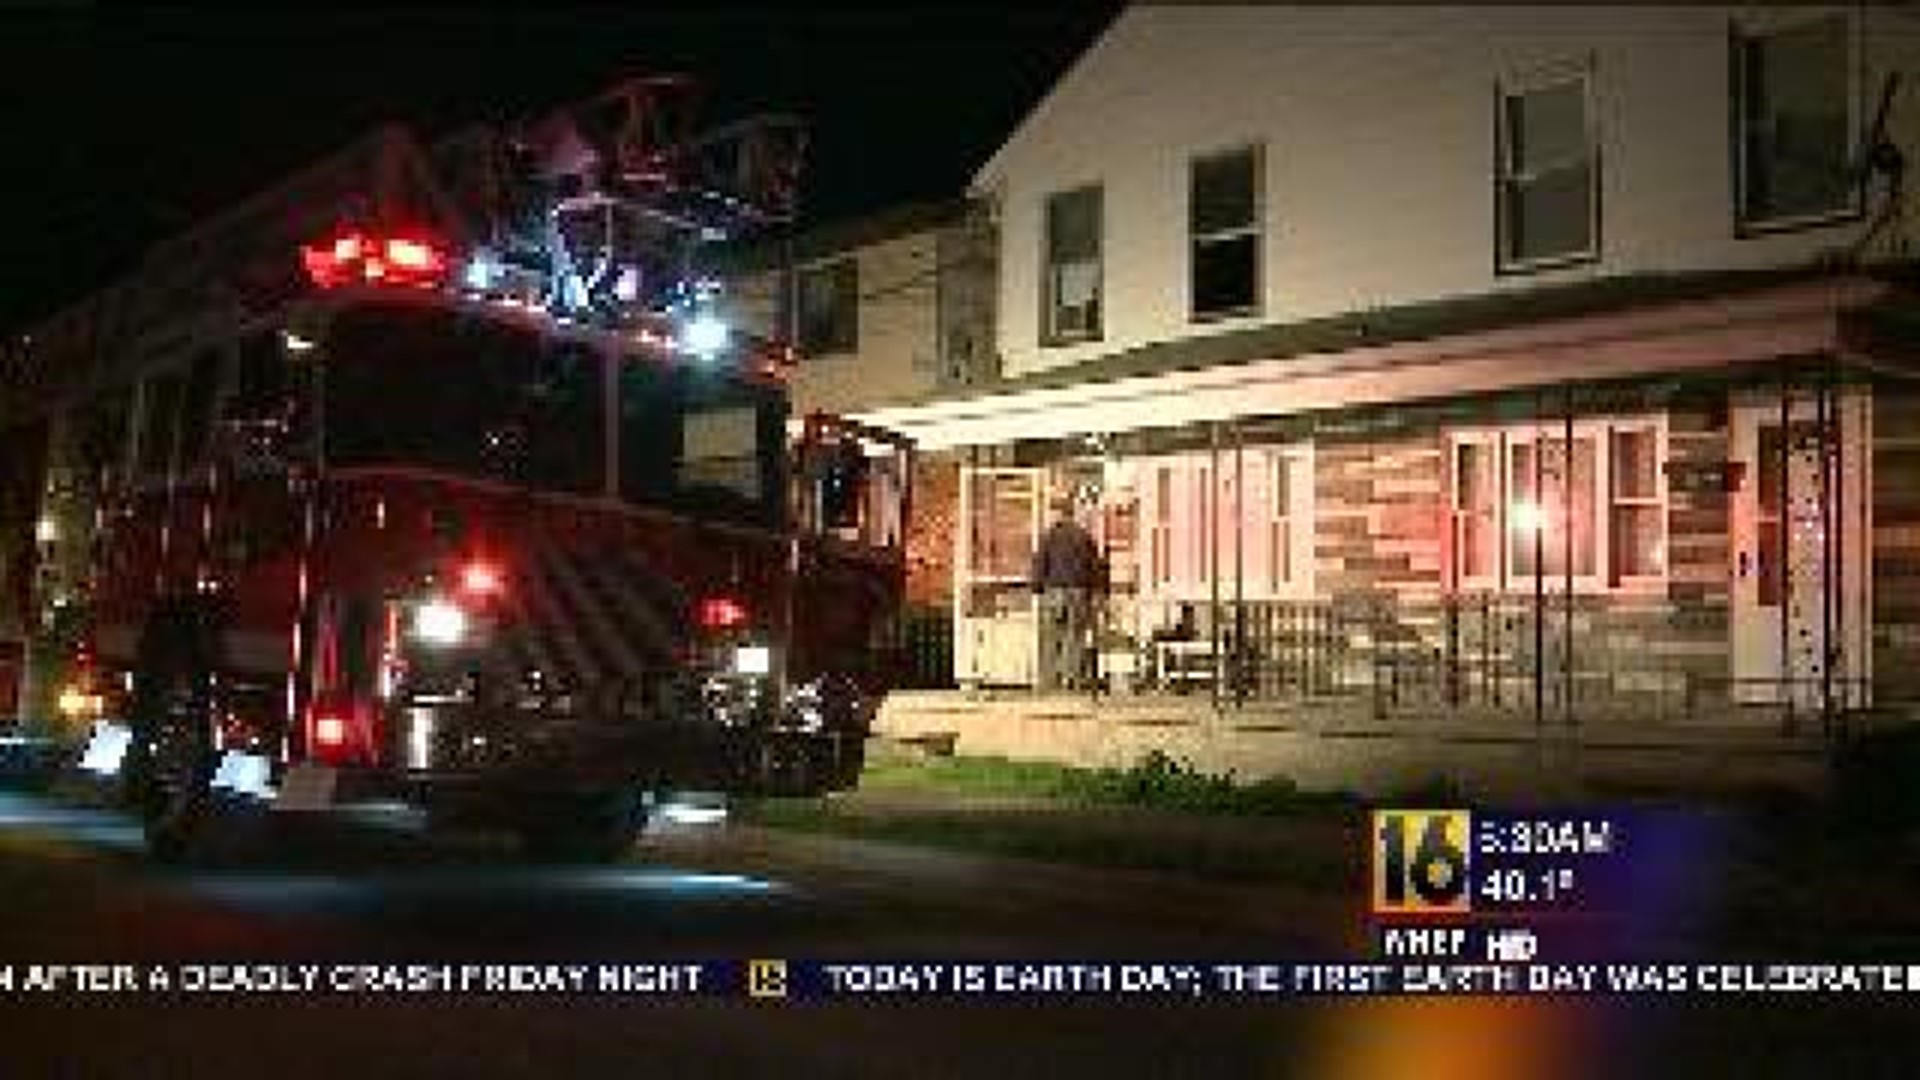 Early Morning Meal Sparks Fire